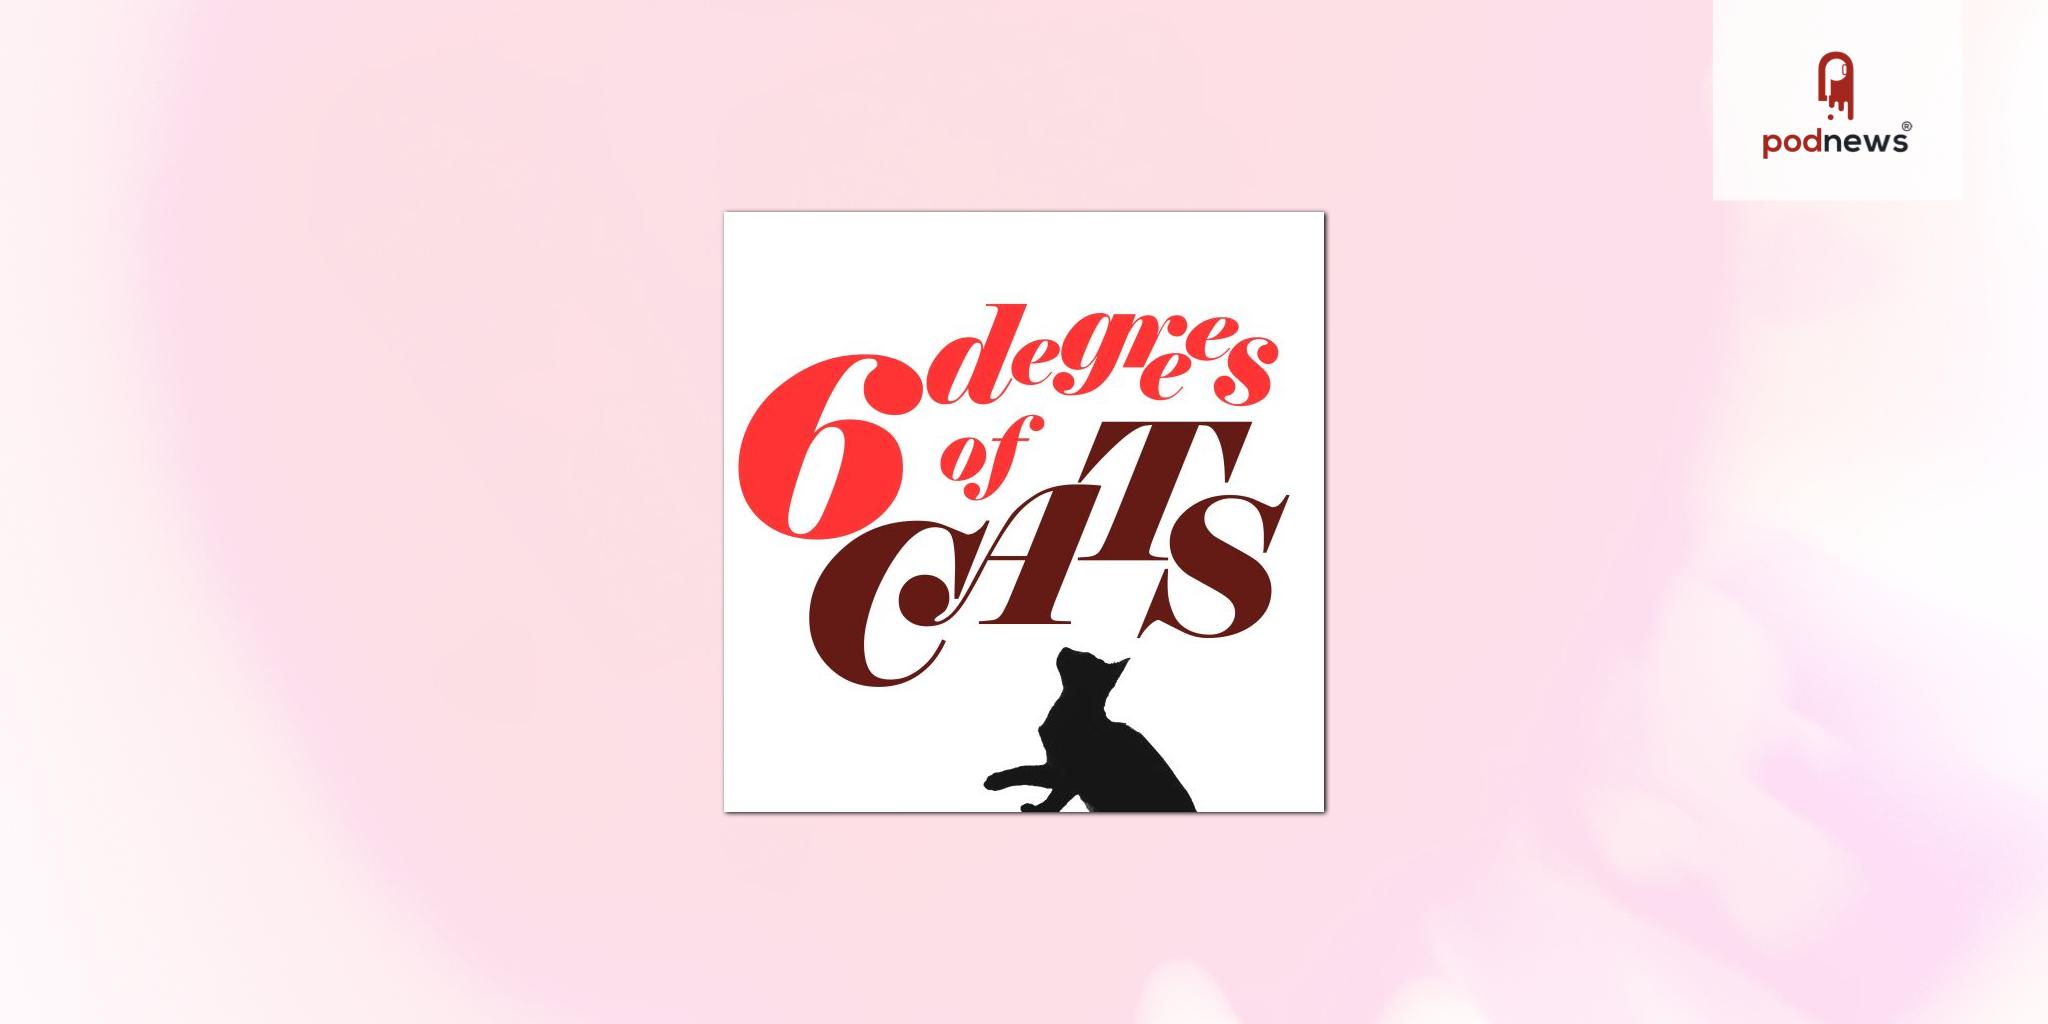 Spotify Sound Up! USA alumni announces premiere of cat-themed history and culture podcast, 6 Degrees of Cats